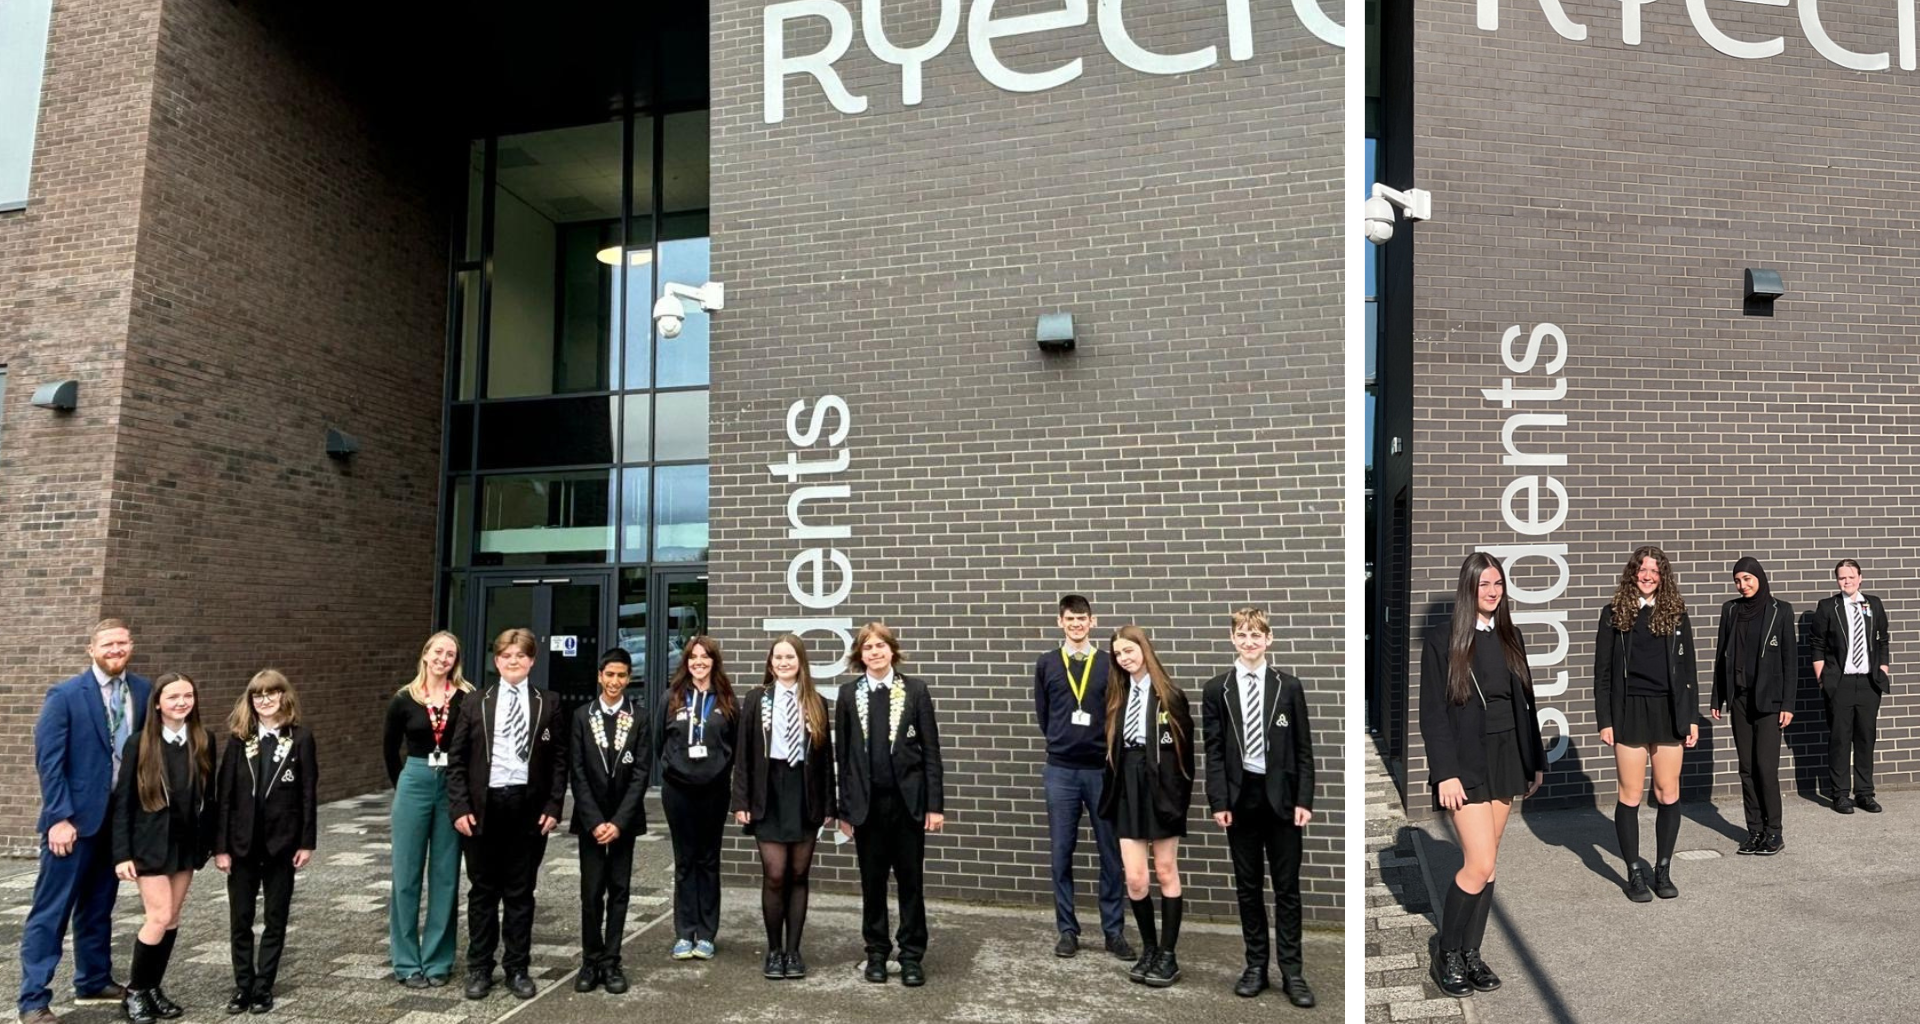 Laurus Ryecroft students chosen as new prefects and captains stand outside the school.